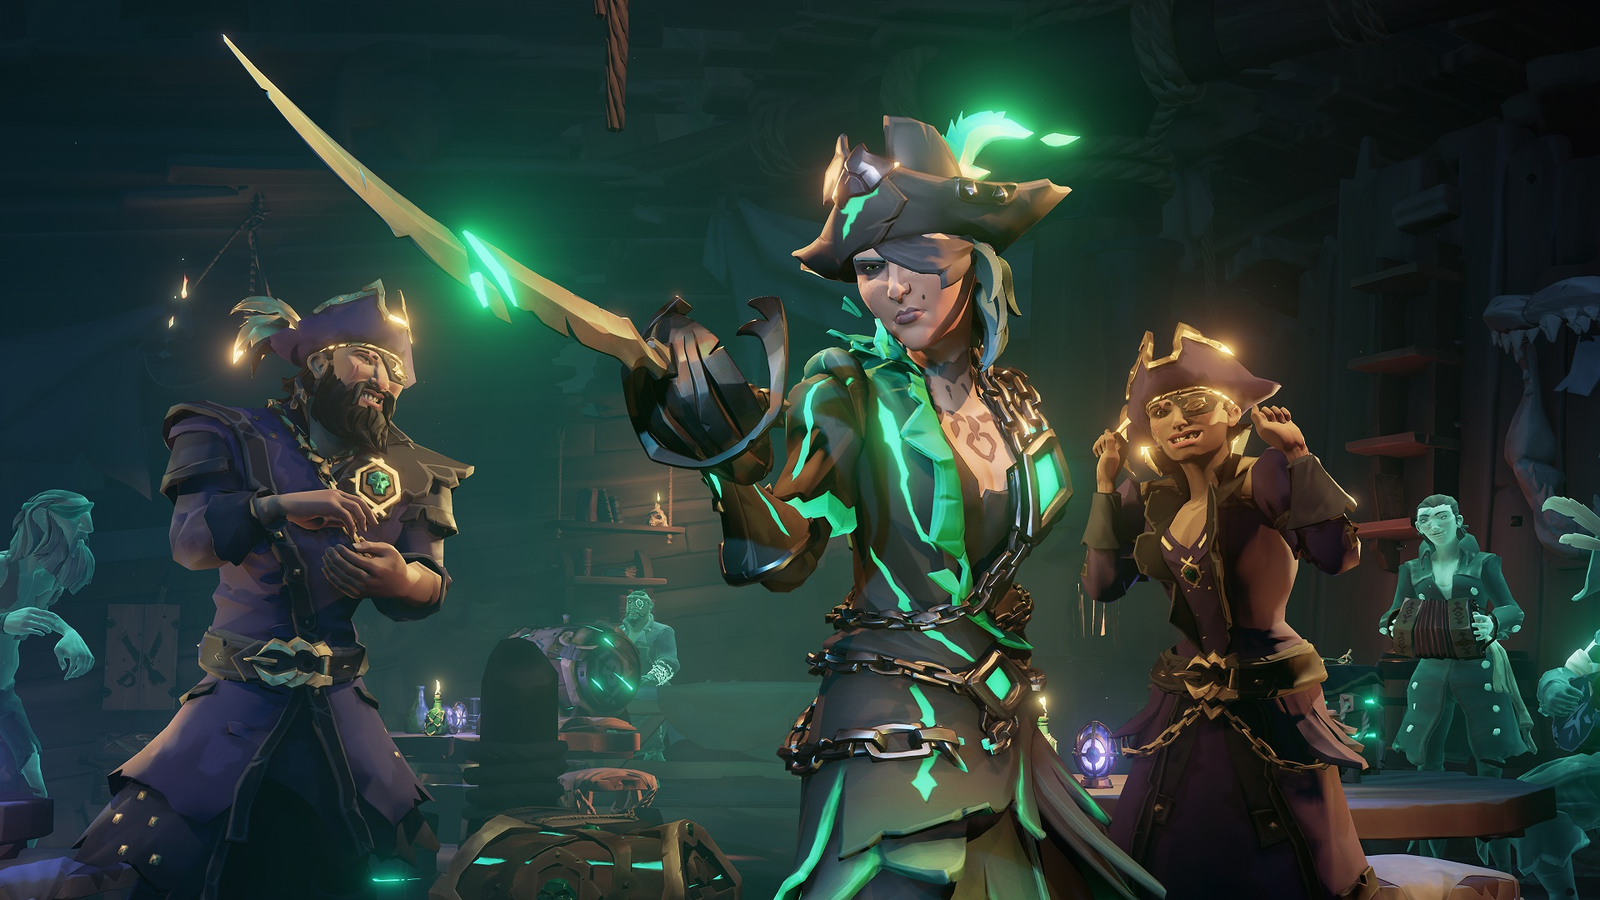 Getting Sea of Thieves launch issues? Here's the error code list